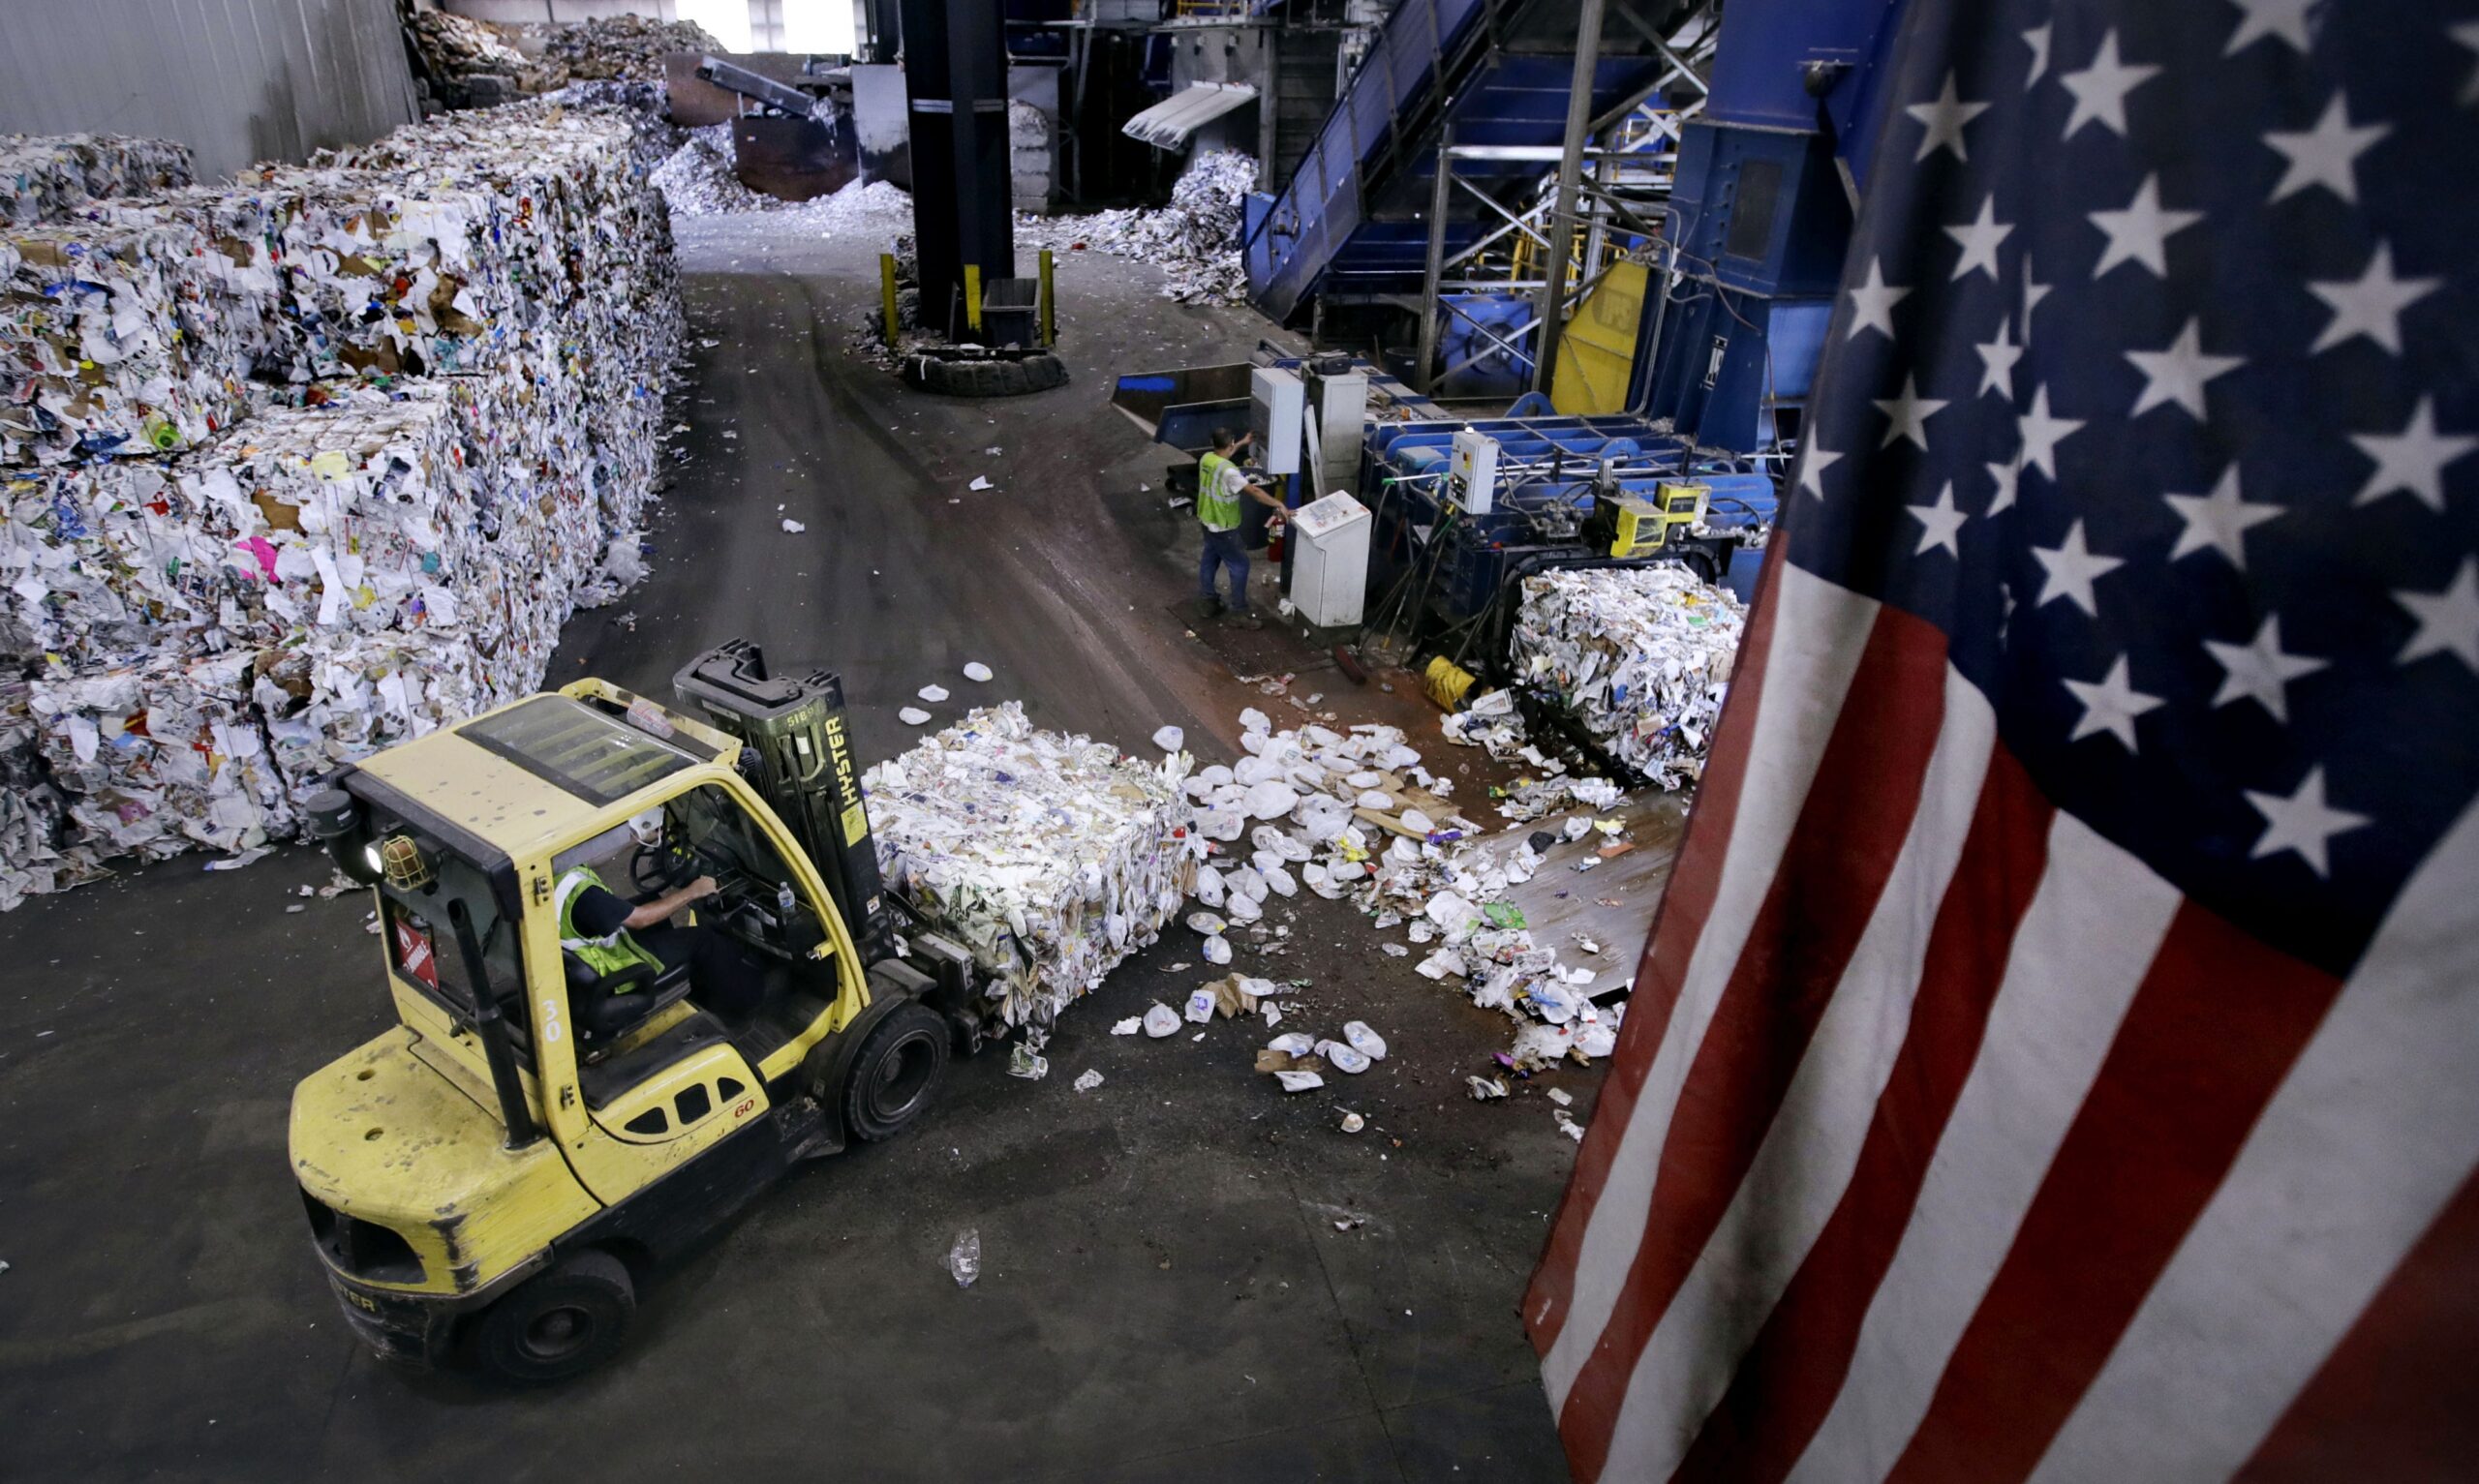 A forklift carries a bundle of recycled materials